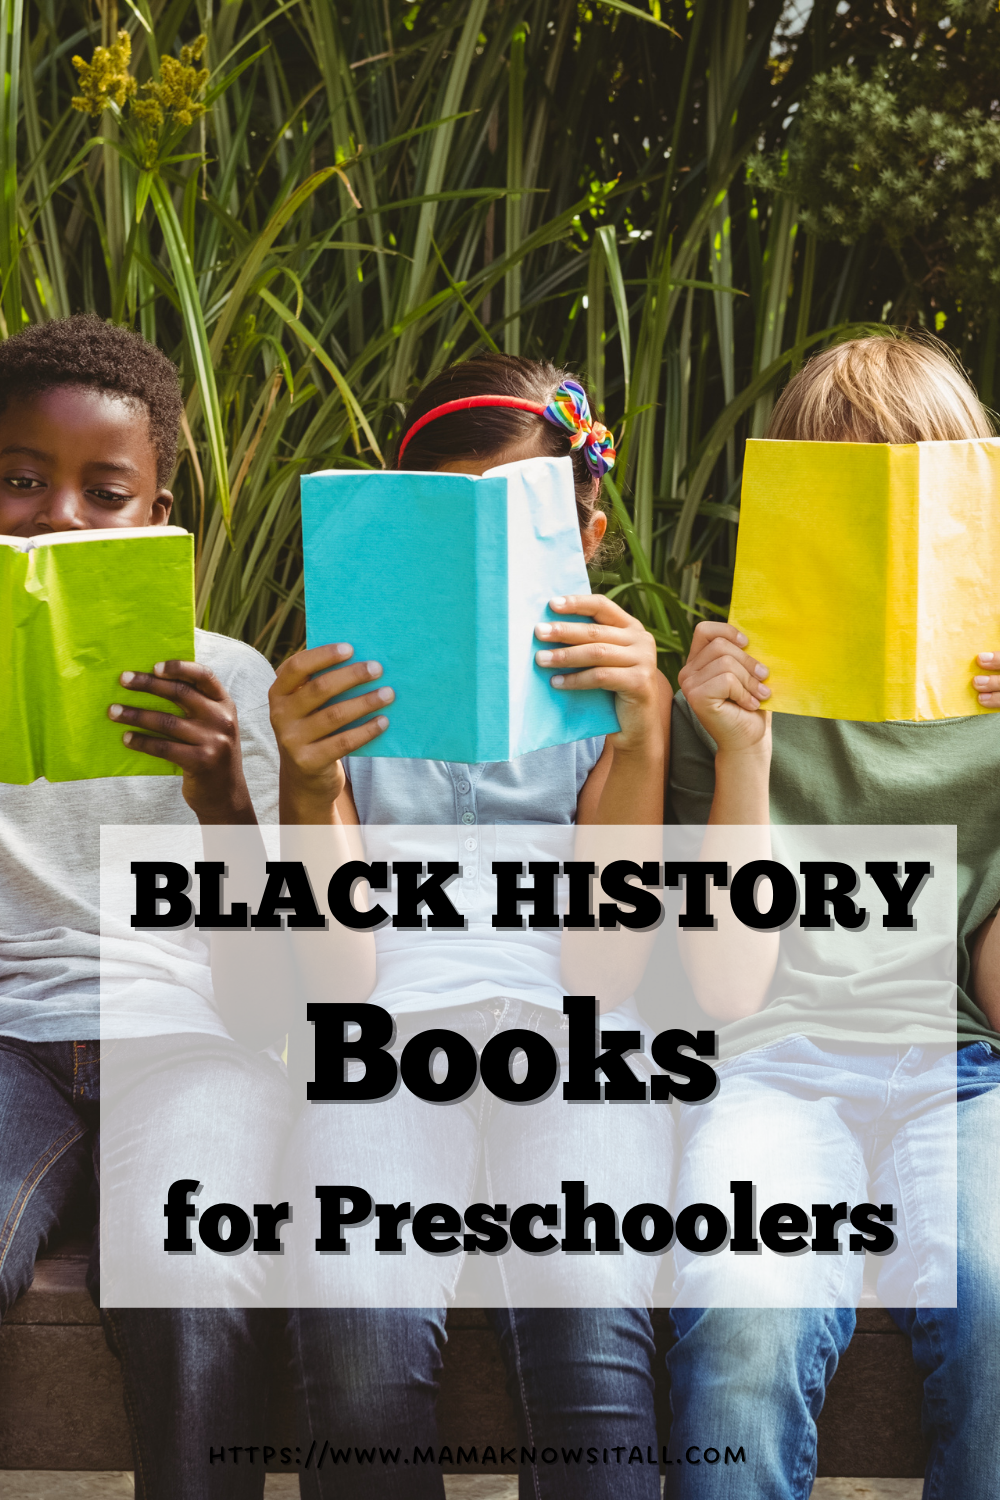 books about Black history for preschoolers